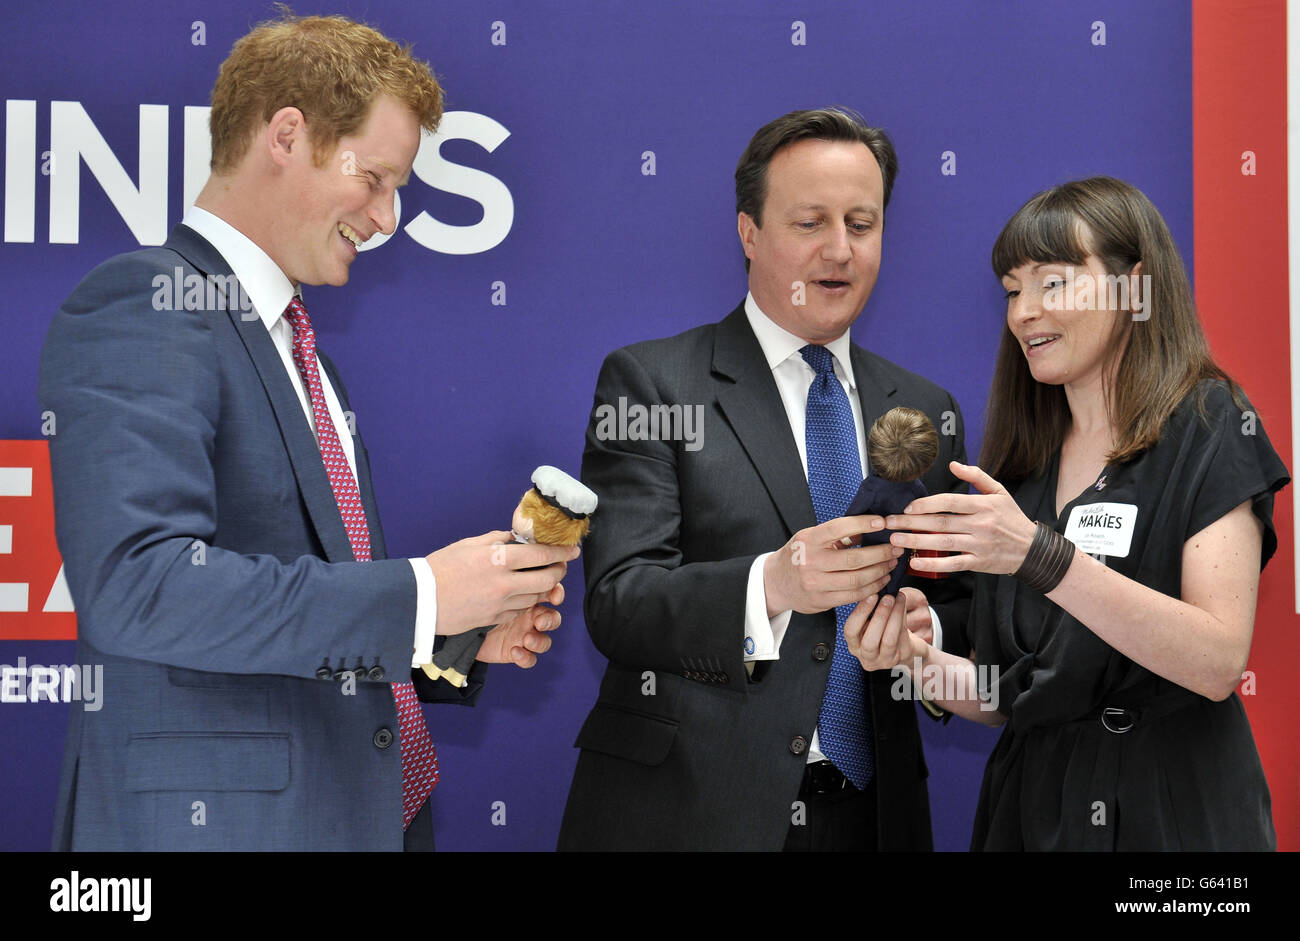 Prince Harry and David Cameron are presented with dolls by 'Makielab' company co-founder Jo Roach of themselves during part of a UK business campaign called 'GREAT' at the Milk Studios, Manhattan, New York. Stock Photo